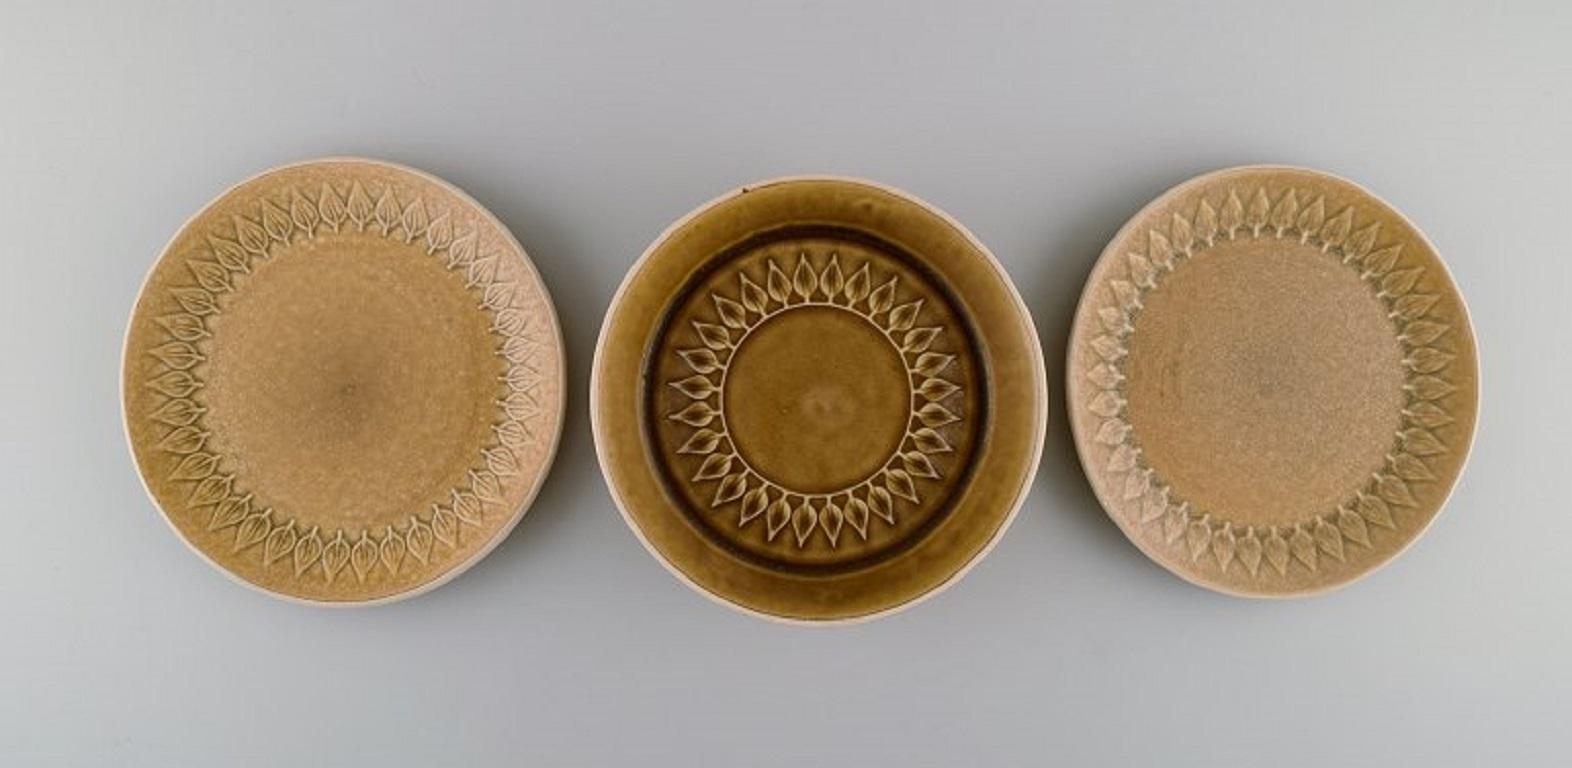 Jens H. Quistgaard (1919-2008) for Bing & Grøndahl / Nissen Kronjyden. 
Relief bowl and two plates in glazed stoneware. Beautiful glaze in mustard yellow shades. 1960s.
The bowl measures: 18.5 x 6 cm.
Plate diameter: 19.5 cm.
In excellent